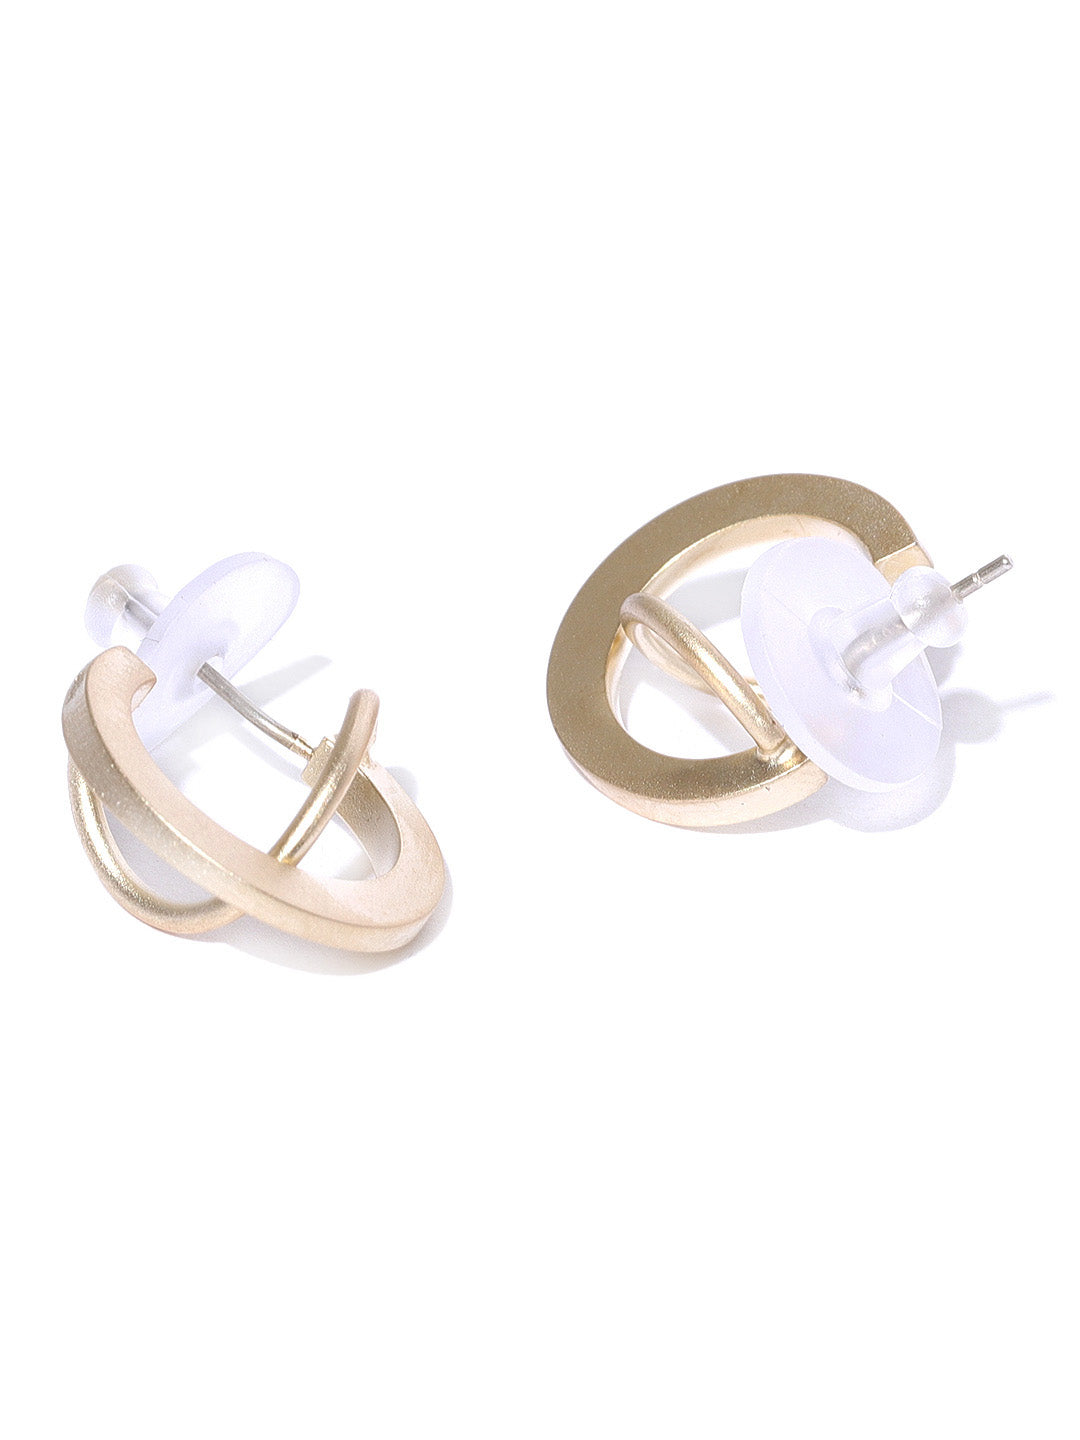 Mat Gold Finish Stud Earrings For Girls/Women With Sterling Silver Pin @ Back